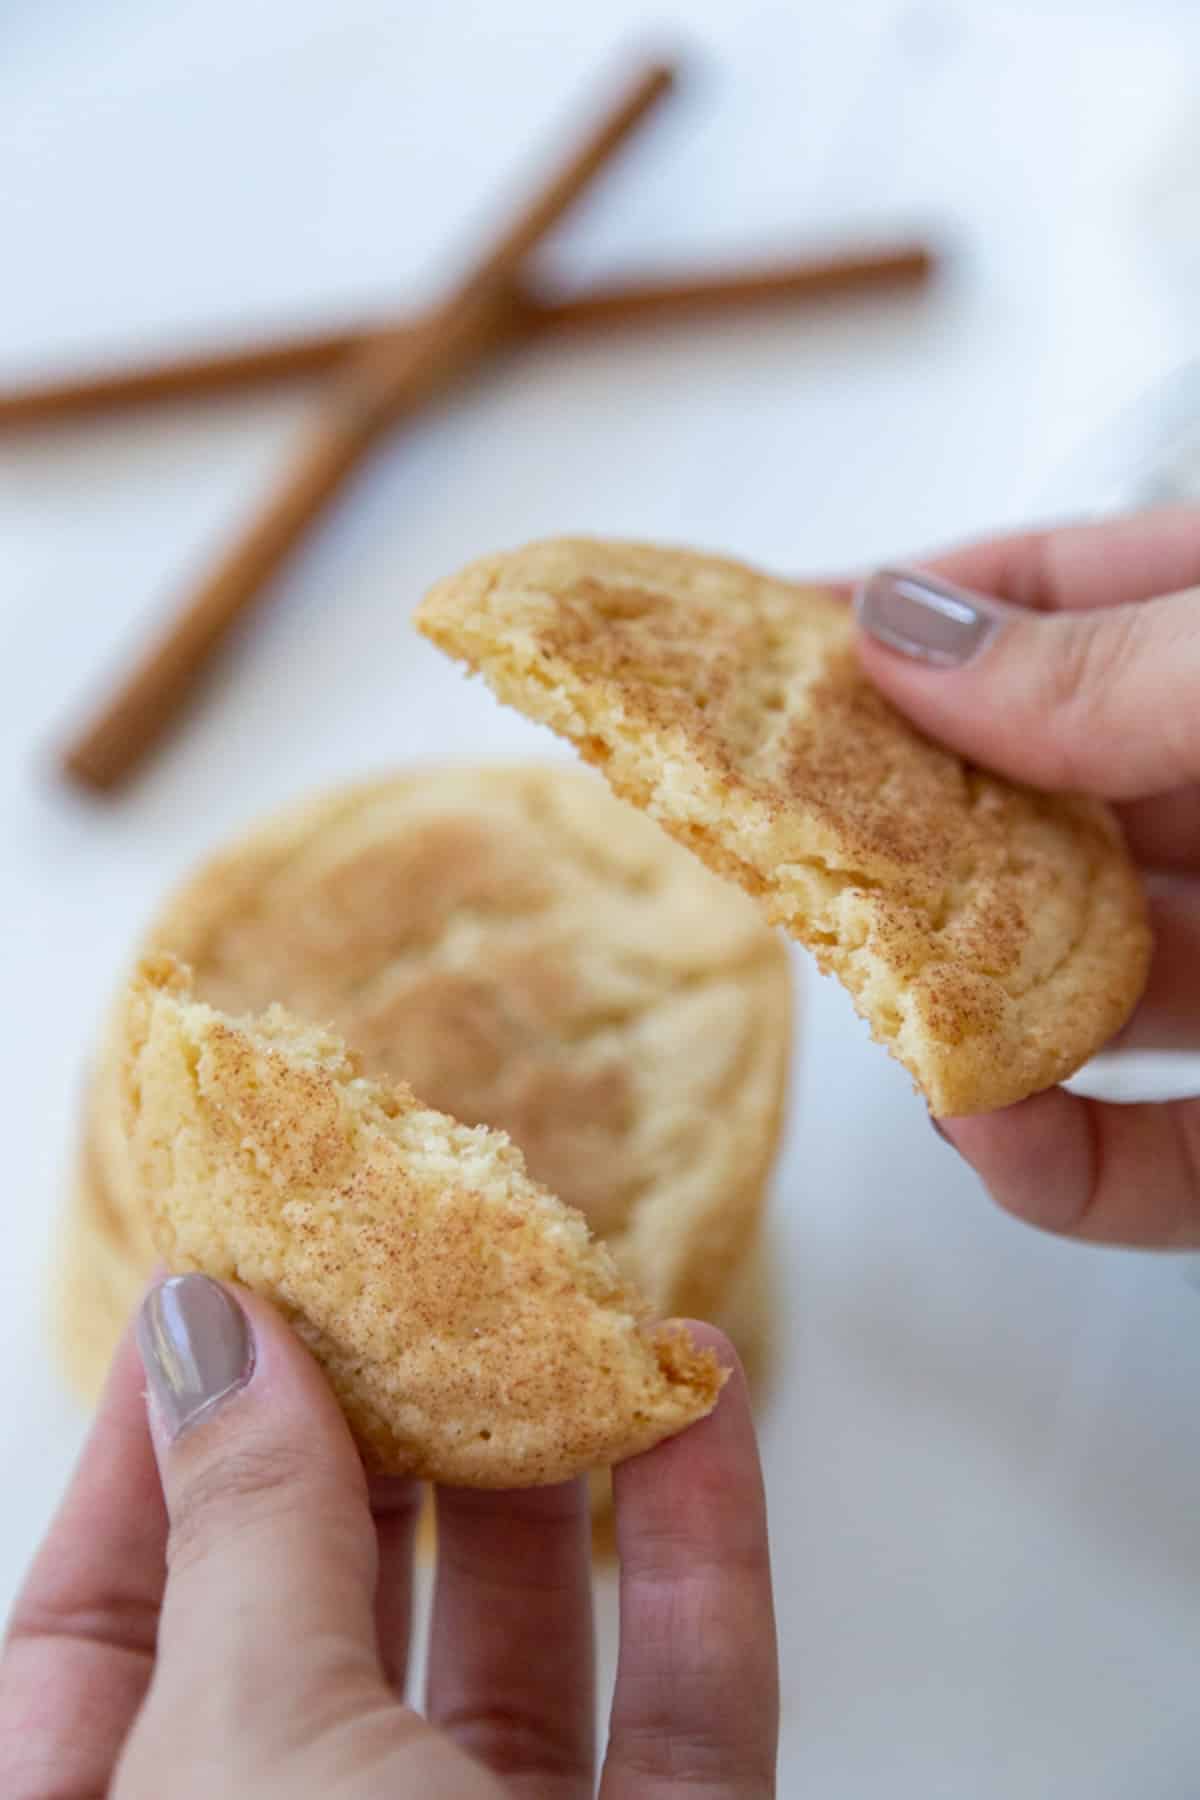 A hand breaking apart a snickerdoodle cookie.